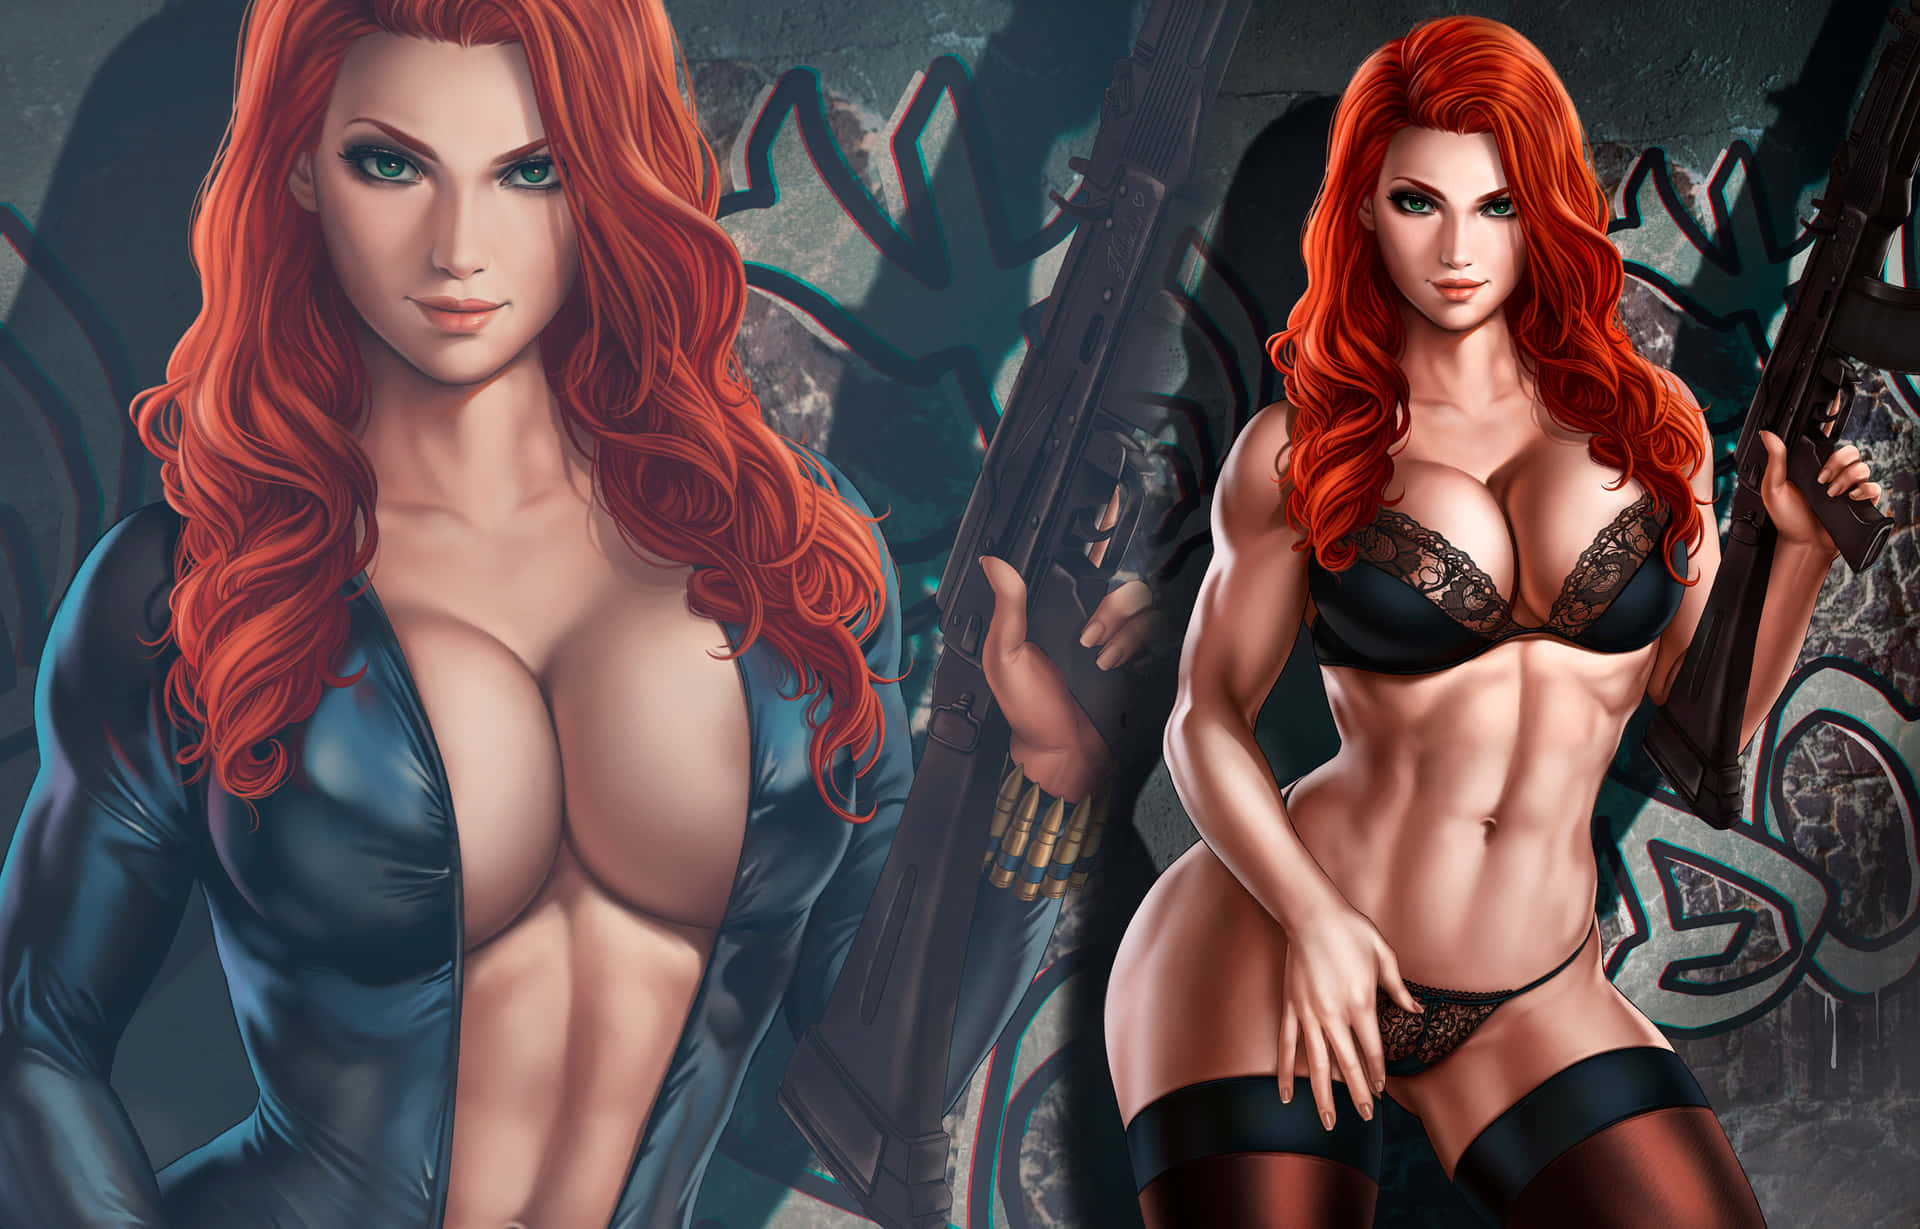 Download Sexy Image Of Muscular Redhead Wallpaper Wallpapers Com